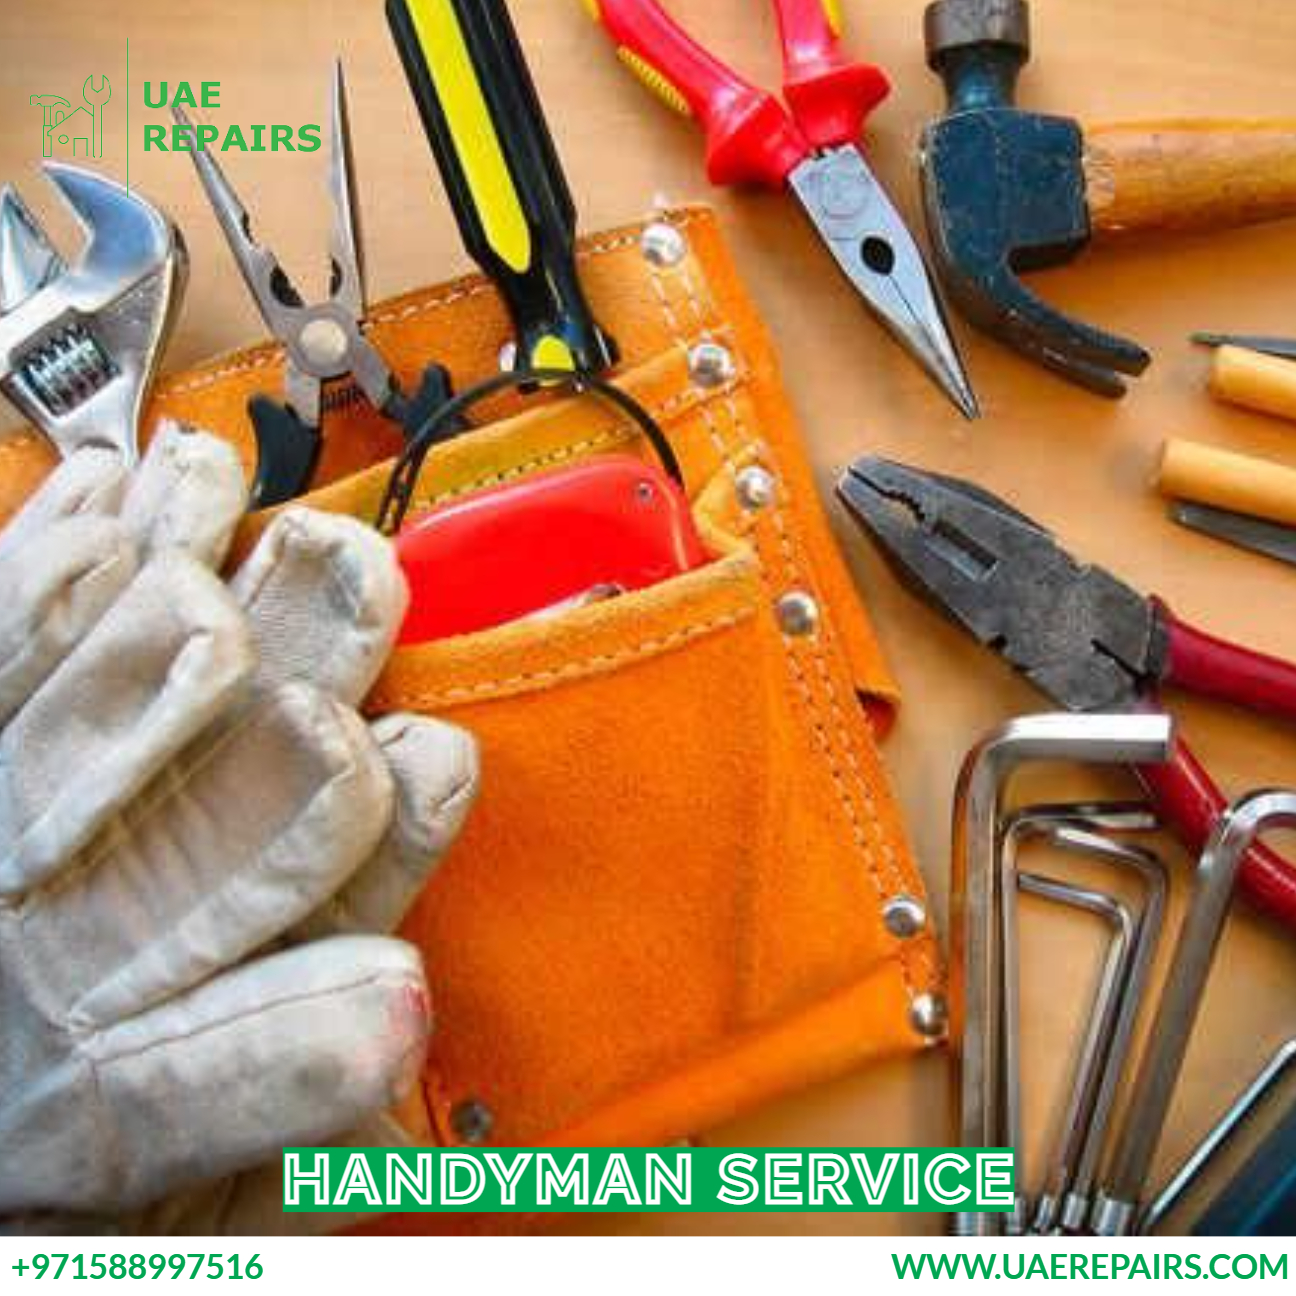 Why Choose Our Handyman Service